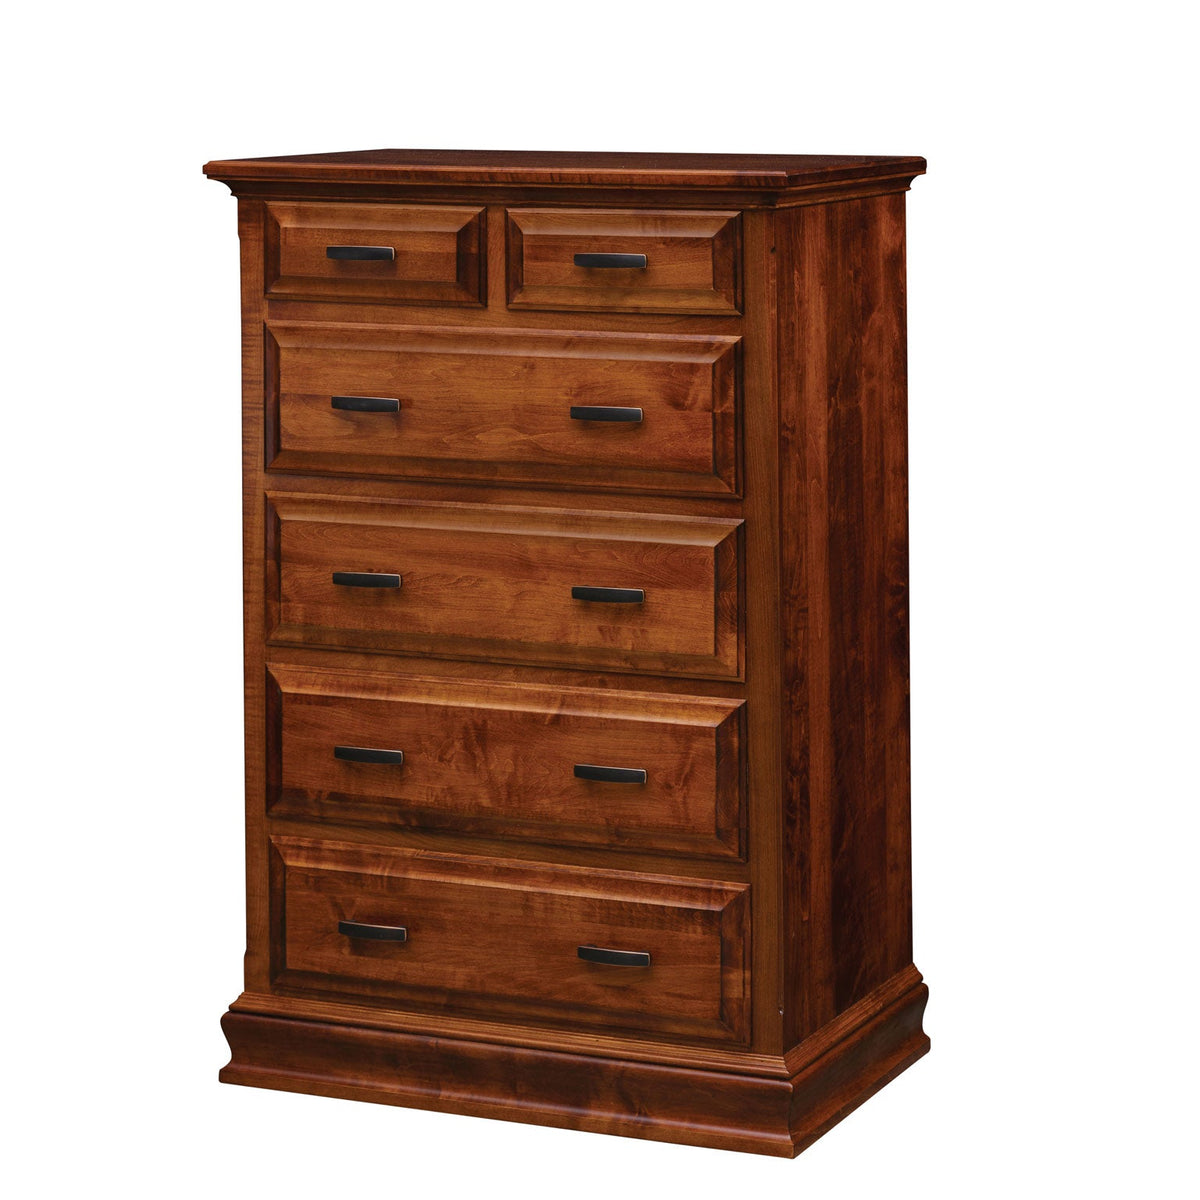 Eden Royal Chest of Drawers - snyders.furniture